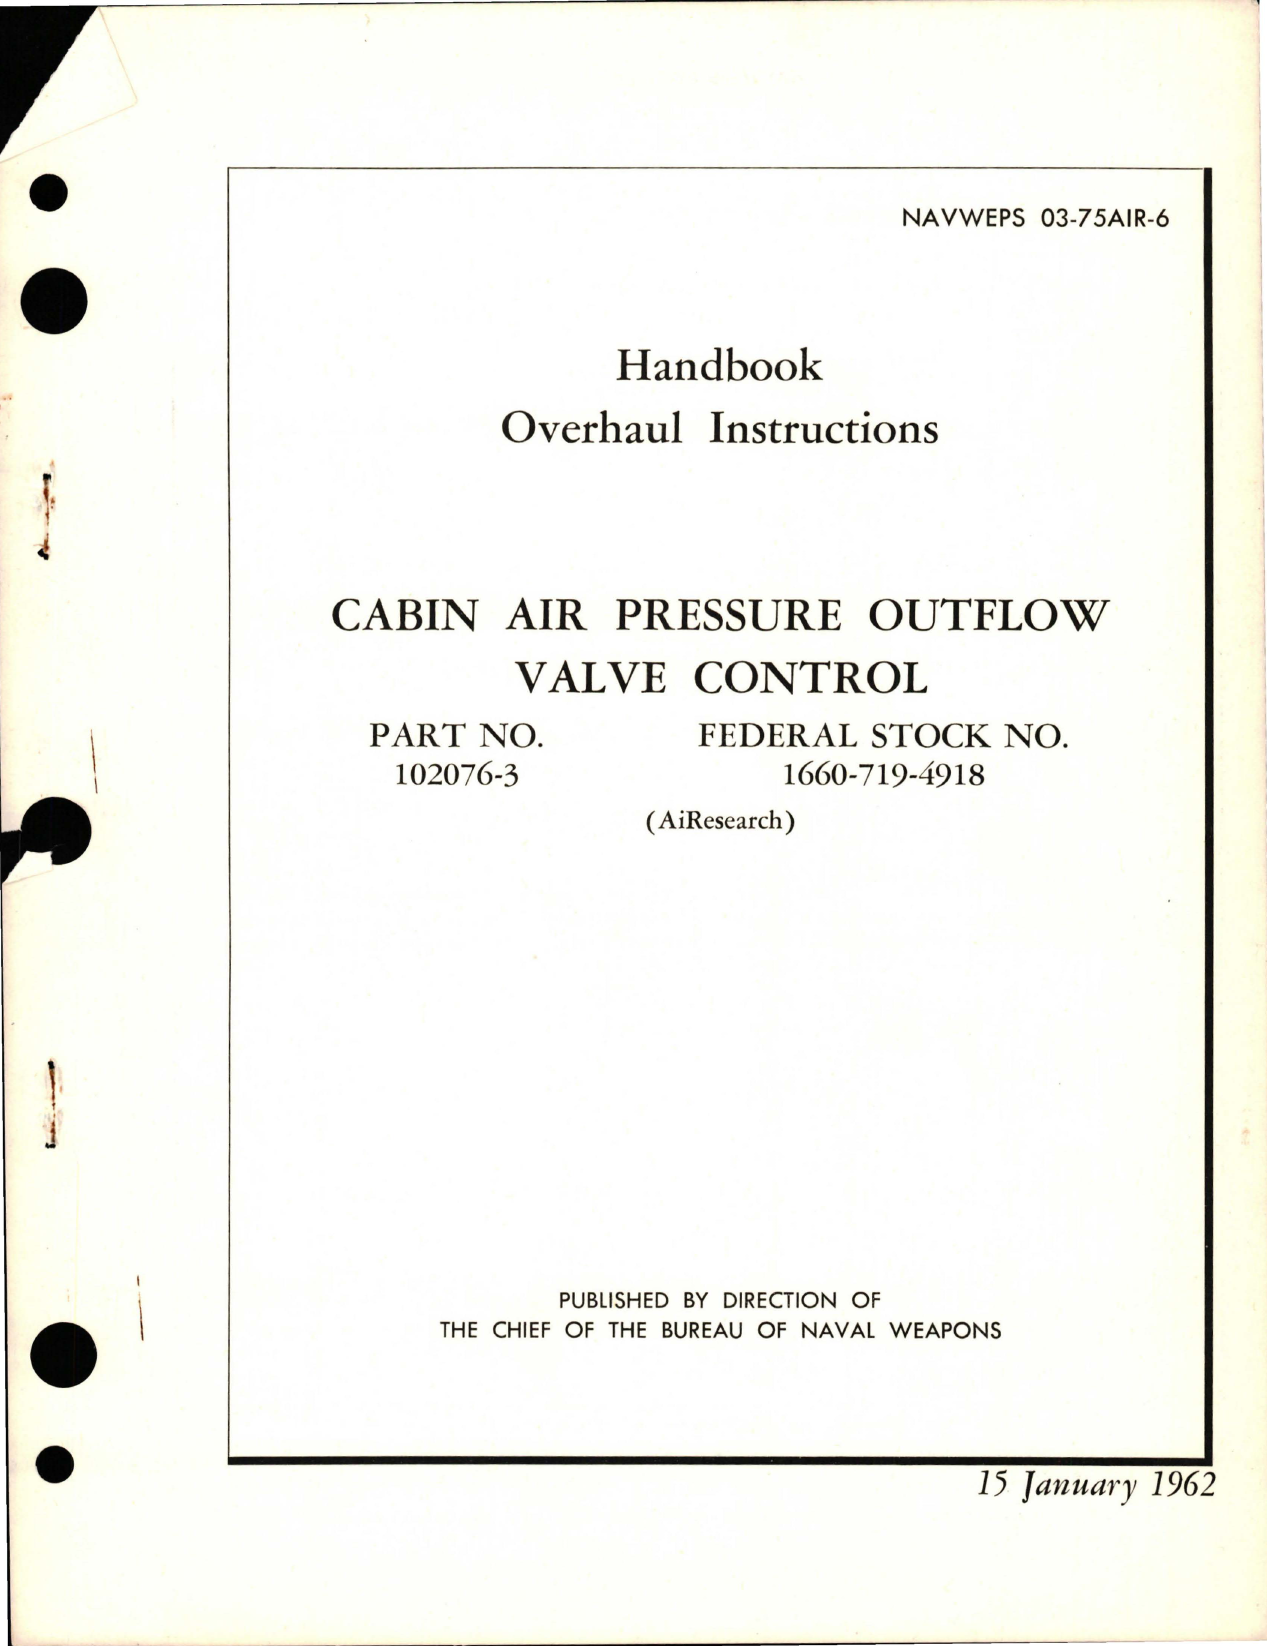 Sample page 1 from AirCorps Library document: Overhaul Instructions for Cabin Air Pressure Outflow Valve Control - Part 102076-3